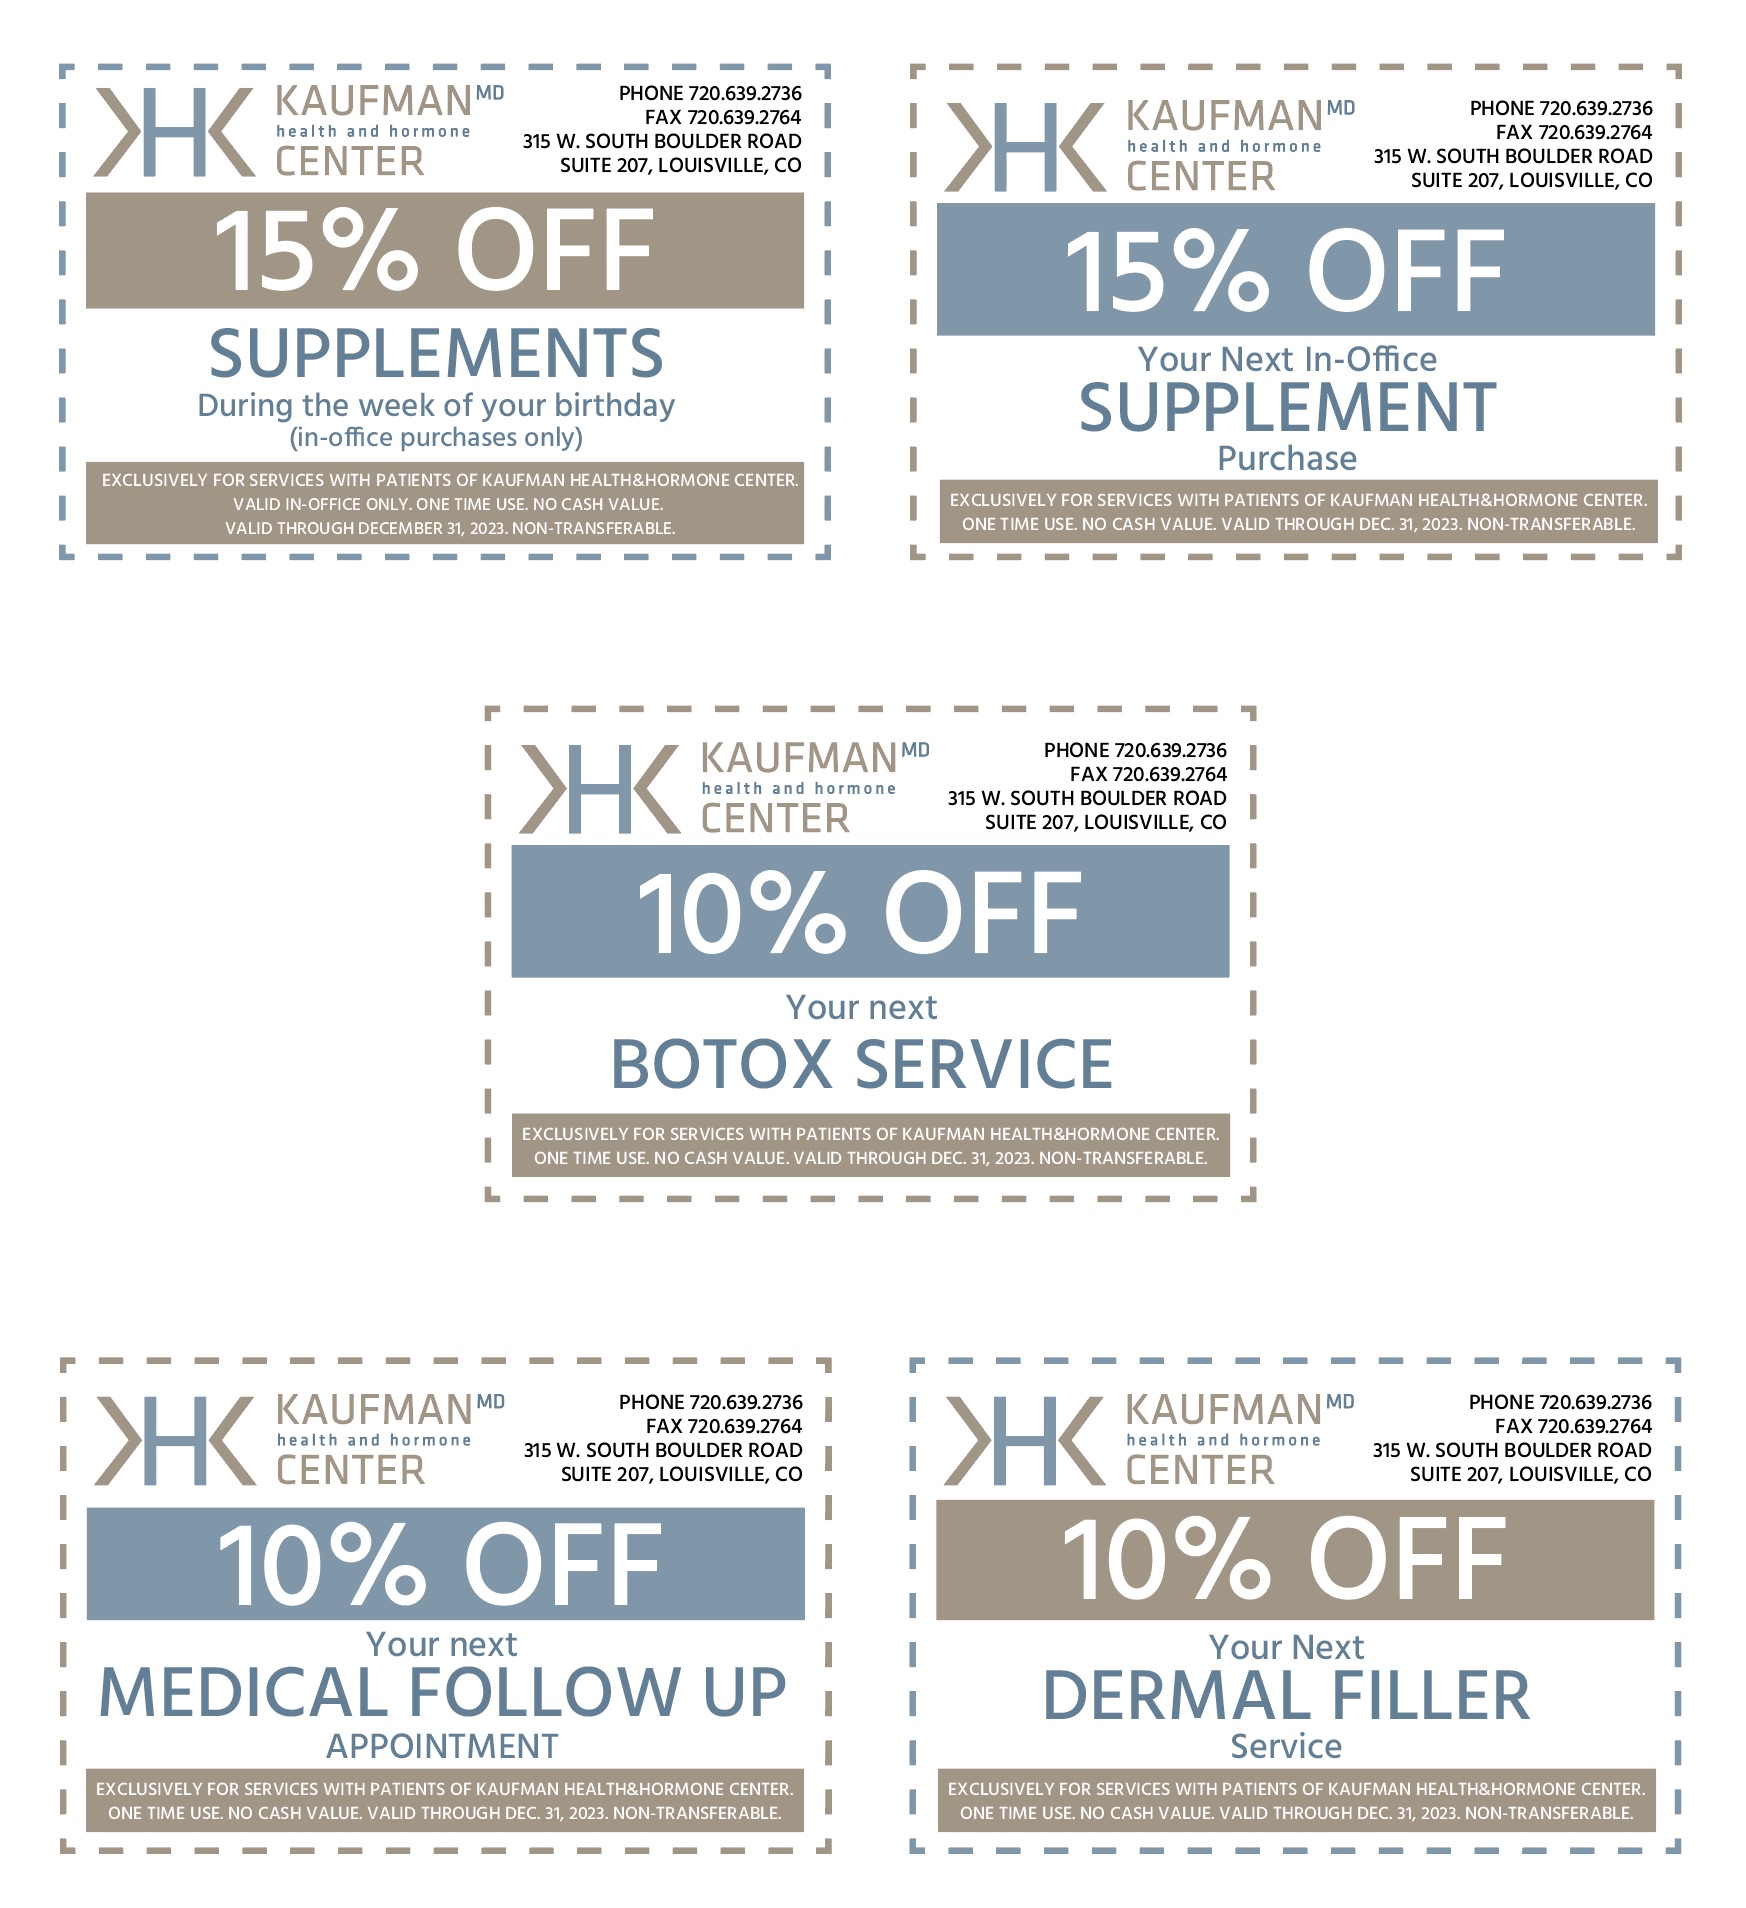 Kaufman Health and Hormone Center Coupons 2023